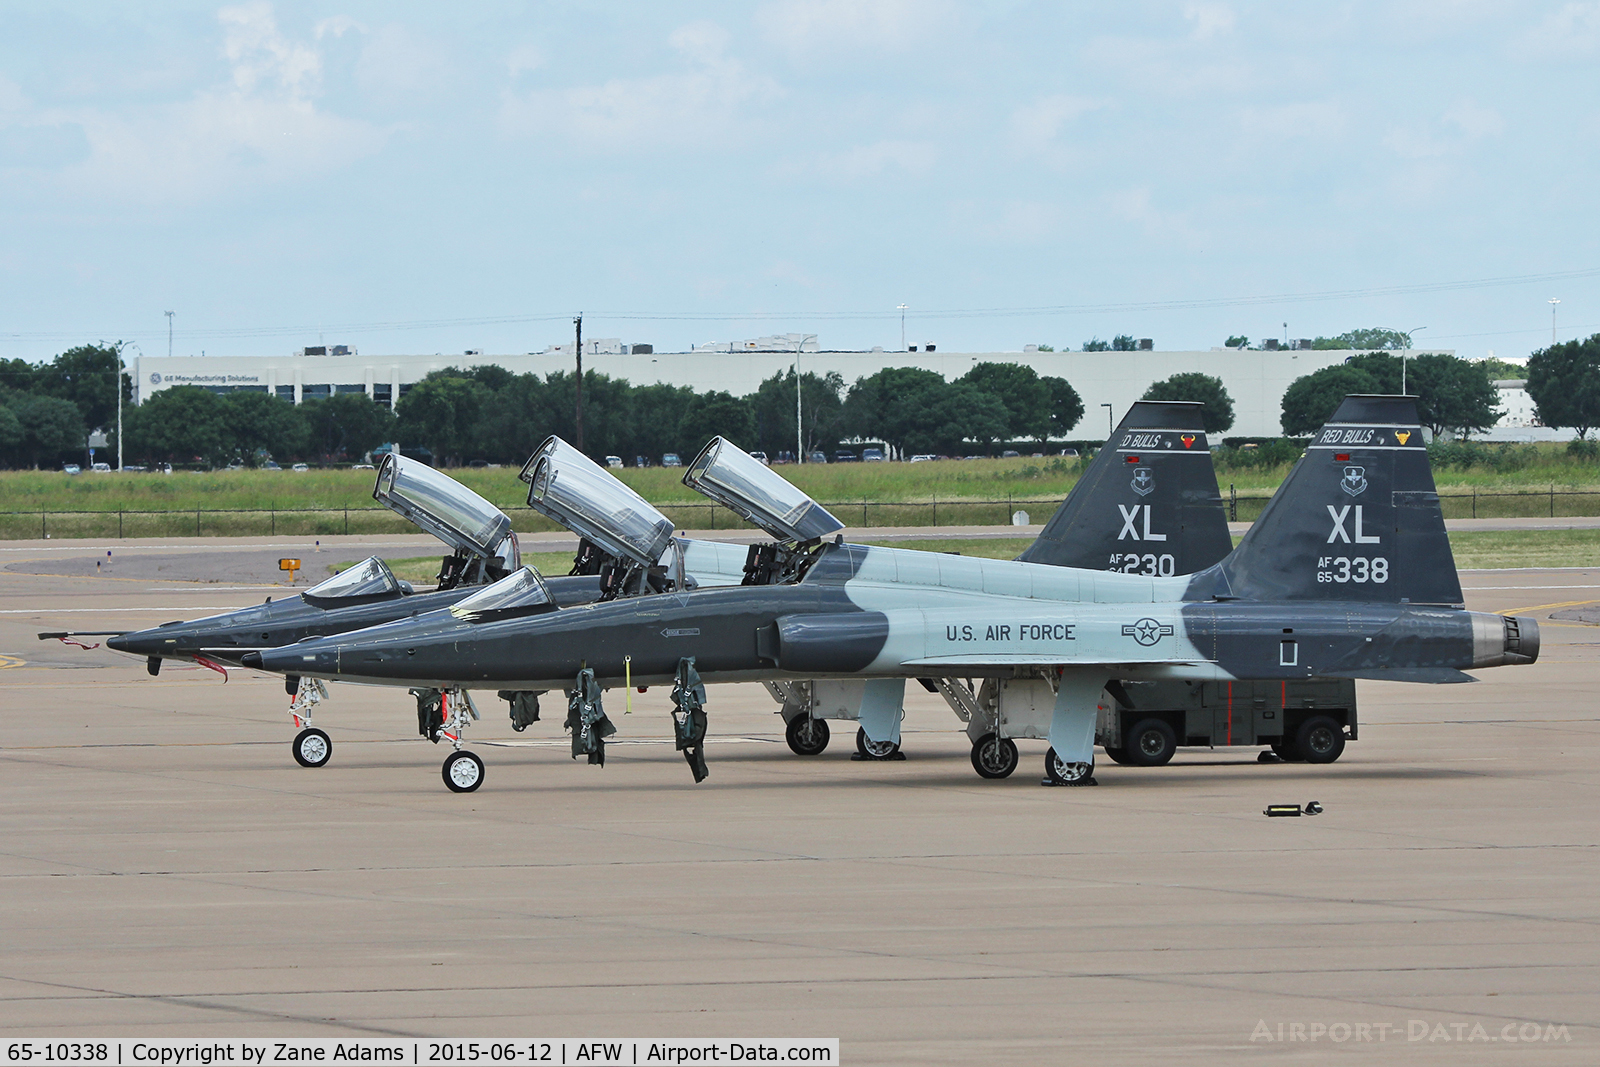 65-10338, 1965 Northrop T-38C Talon C/N N.5757, USAF T-38's on the ramp at Alliance Airport - Fort Worth, Texas